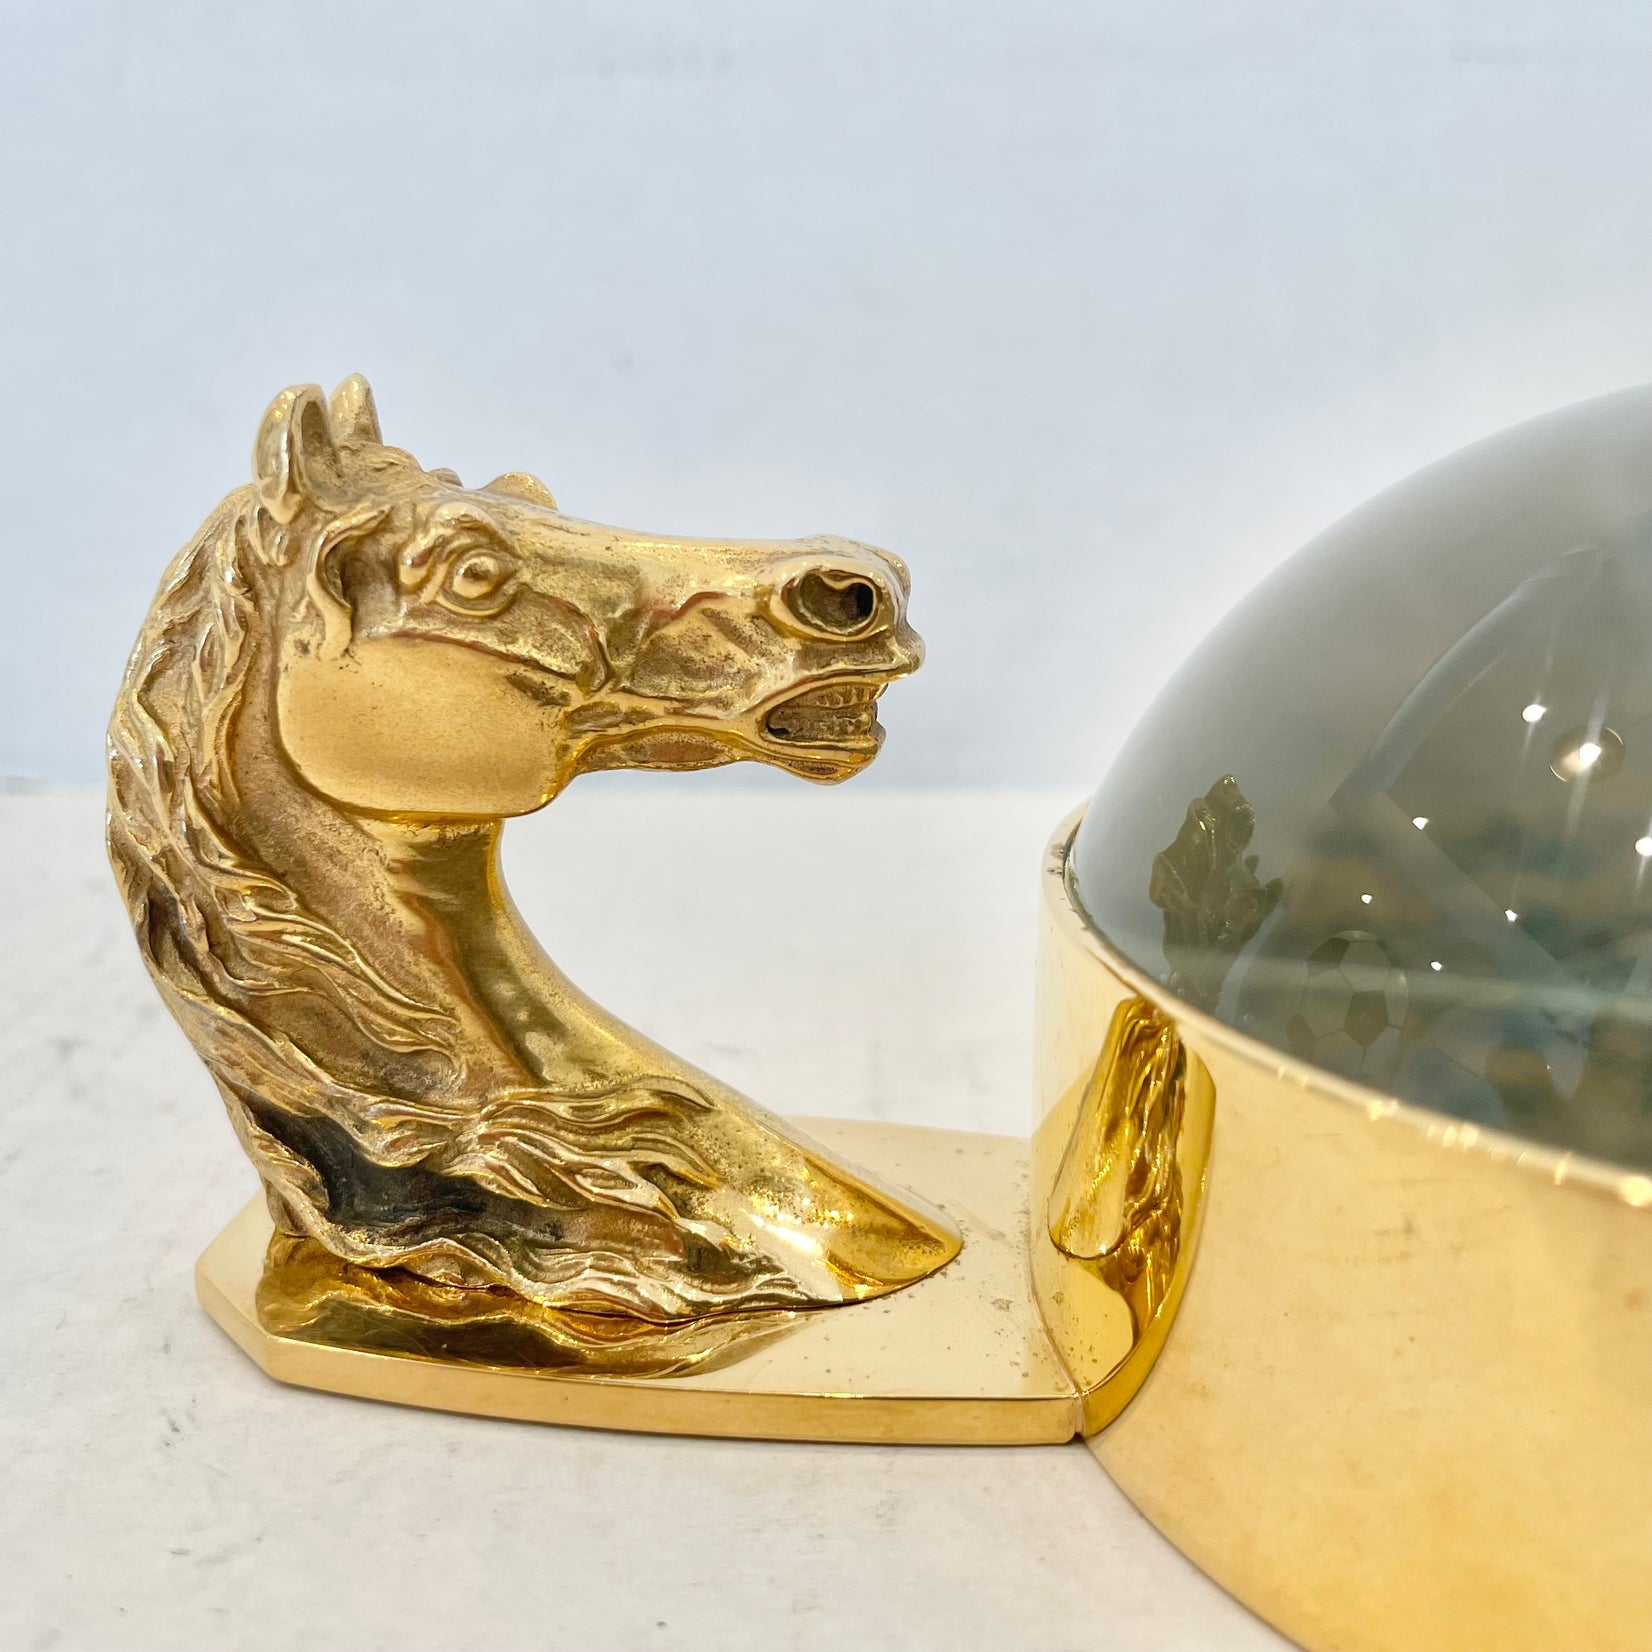 Hermes Equestrian Magnifying Glass, 1960s France